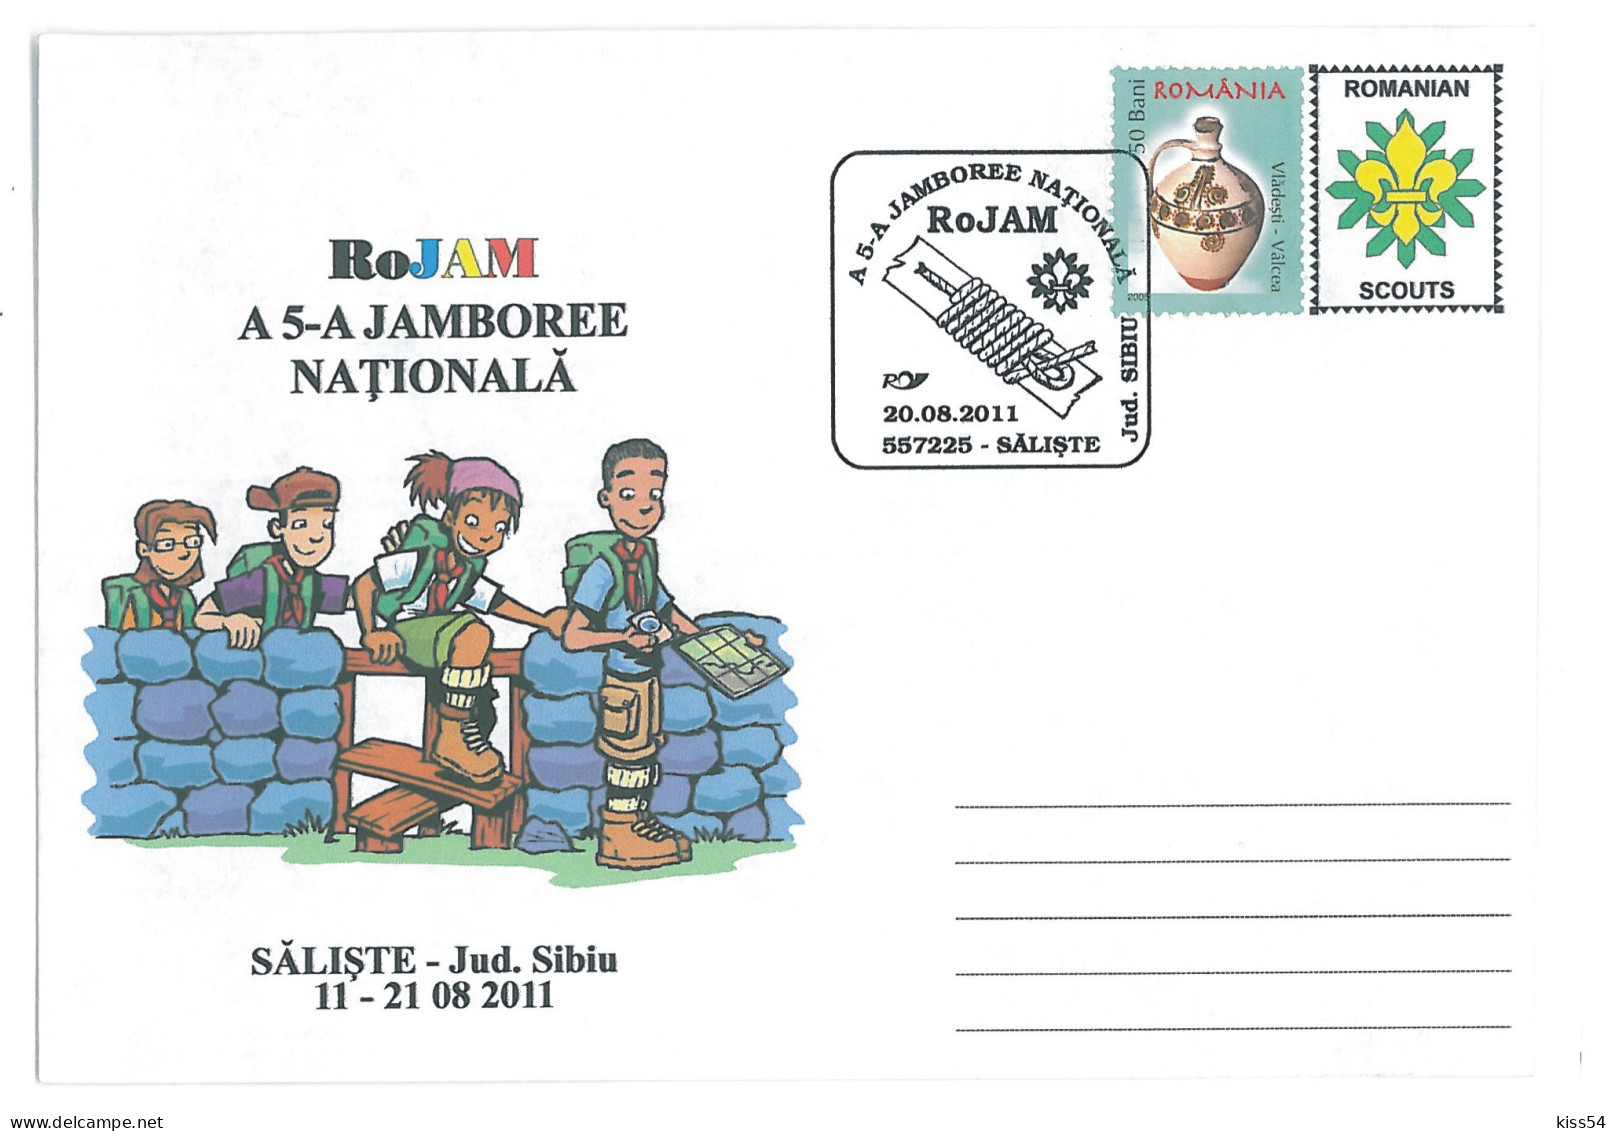 SC 61 - 1305 Scout ROMANIA, National JAMBOREE - Cover - Used - 2011 - Covers & Documents